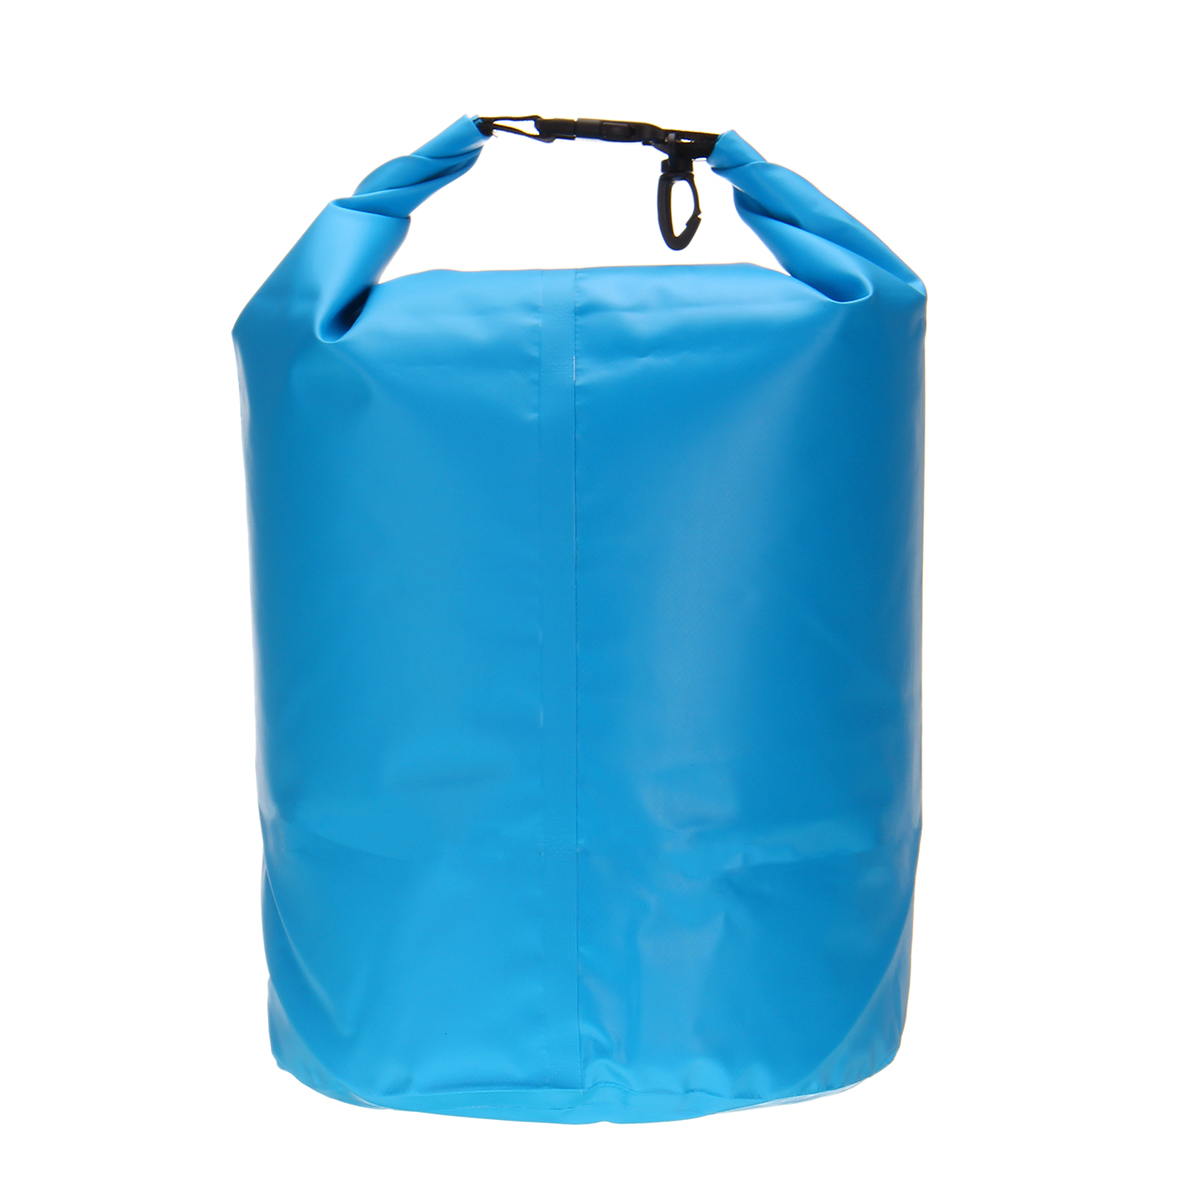 15L-Outdoor-Swimming-Air-Inflation-Floating-Mobile-Phone-Camera-Storage-PVC-Waterproof-Bag-1820816-12